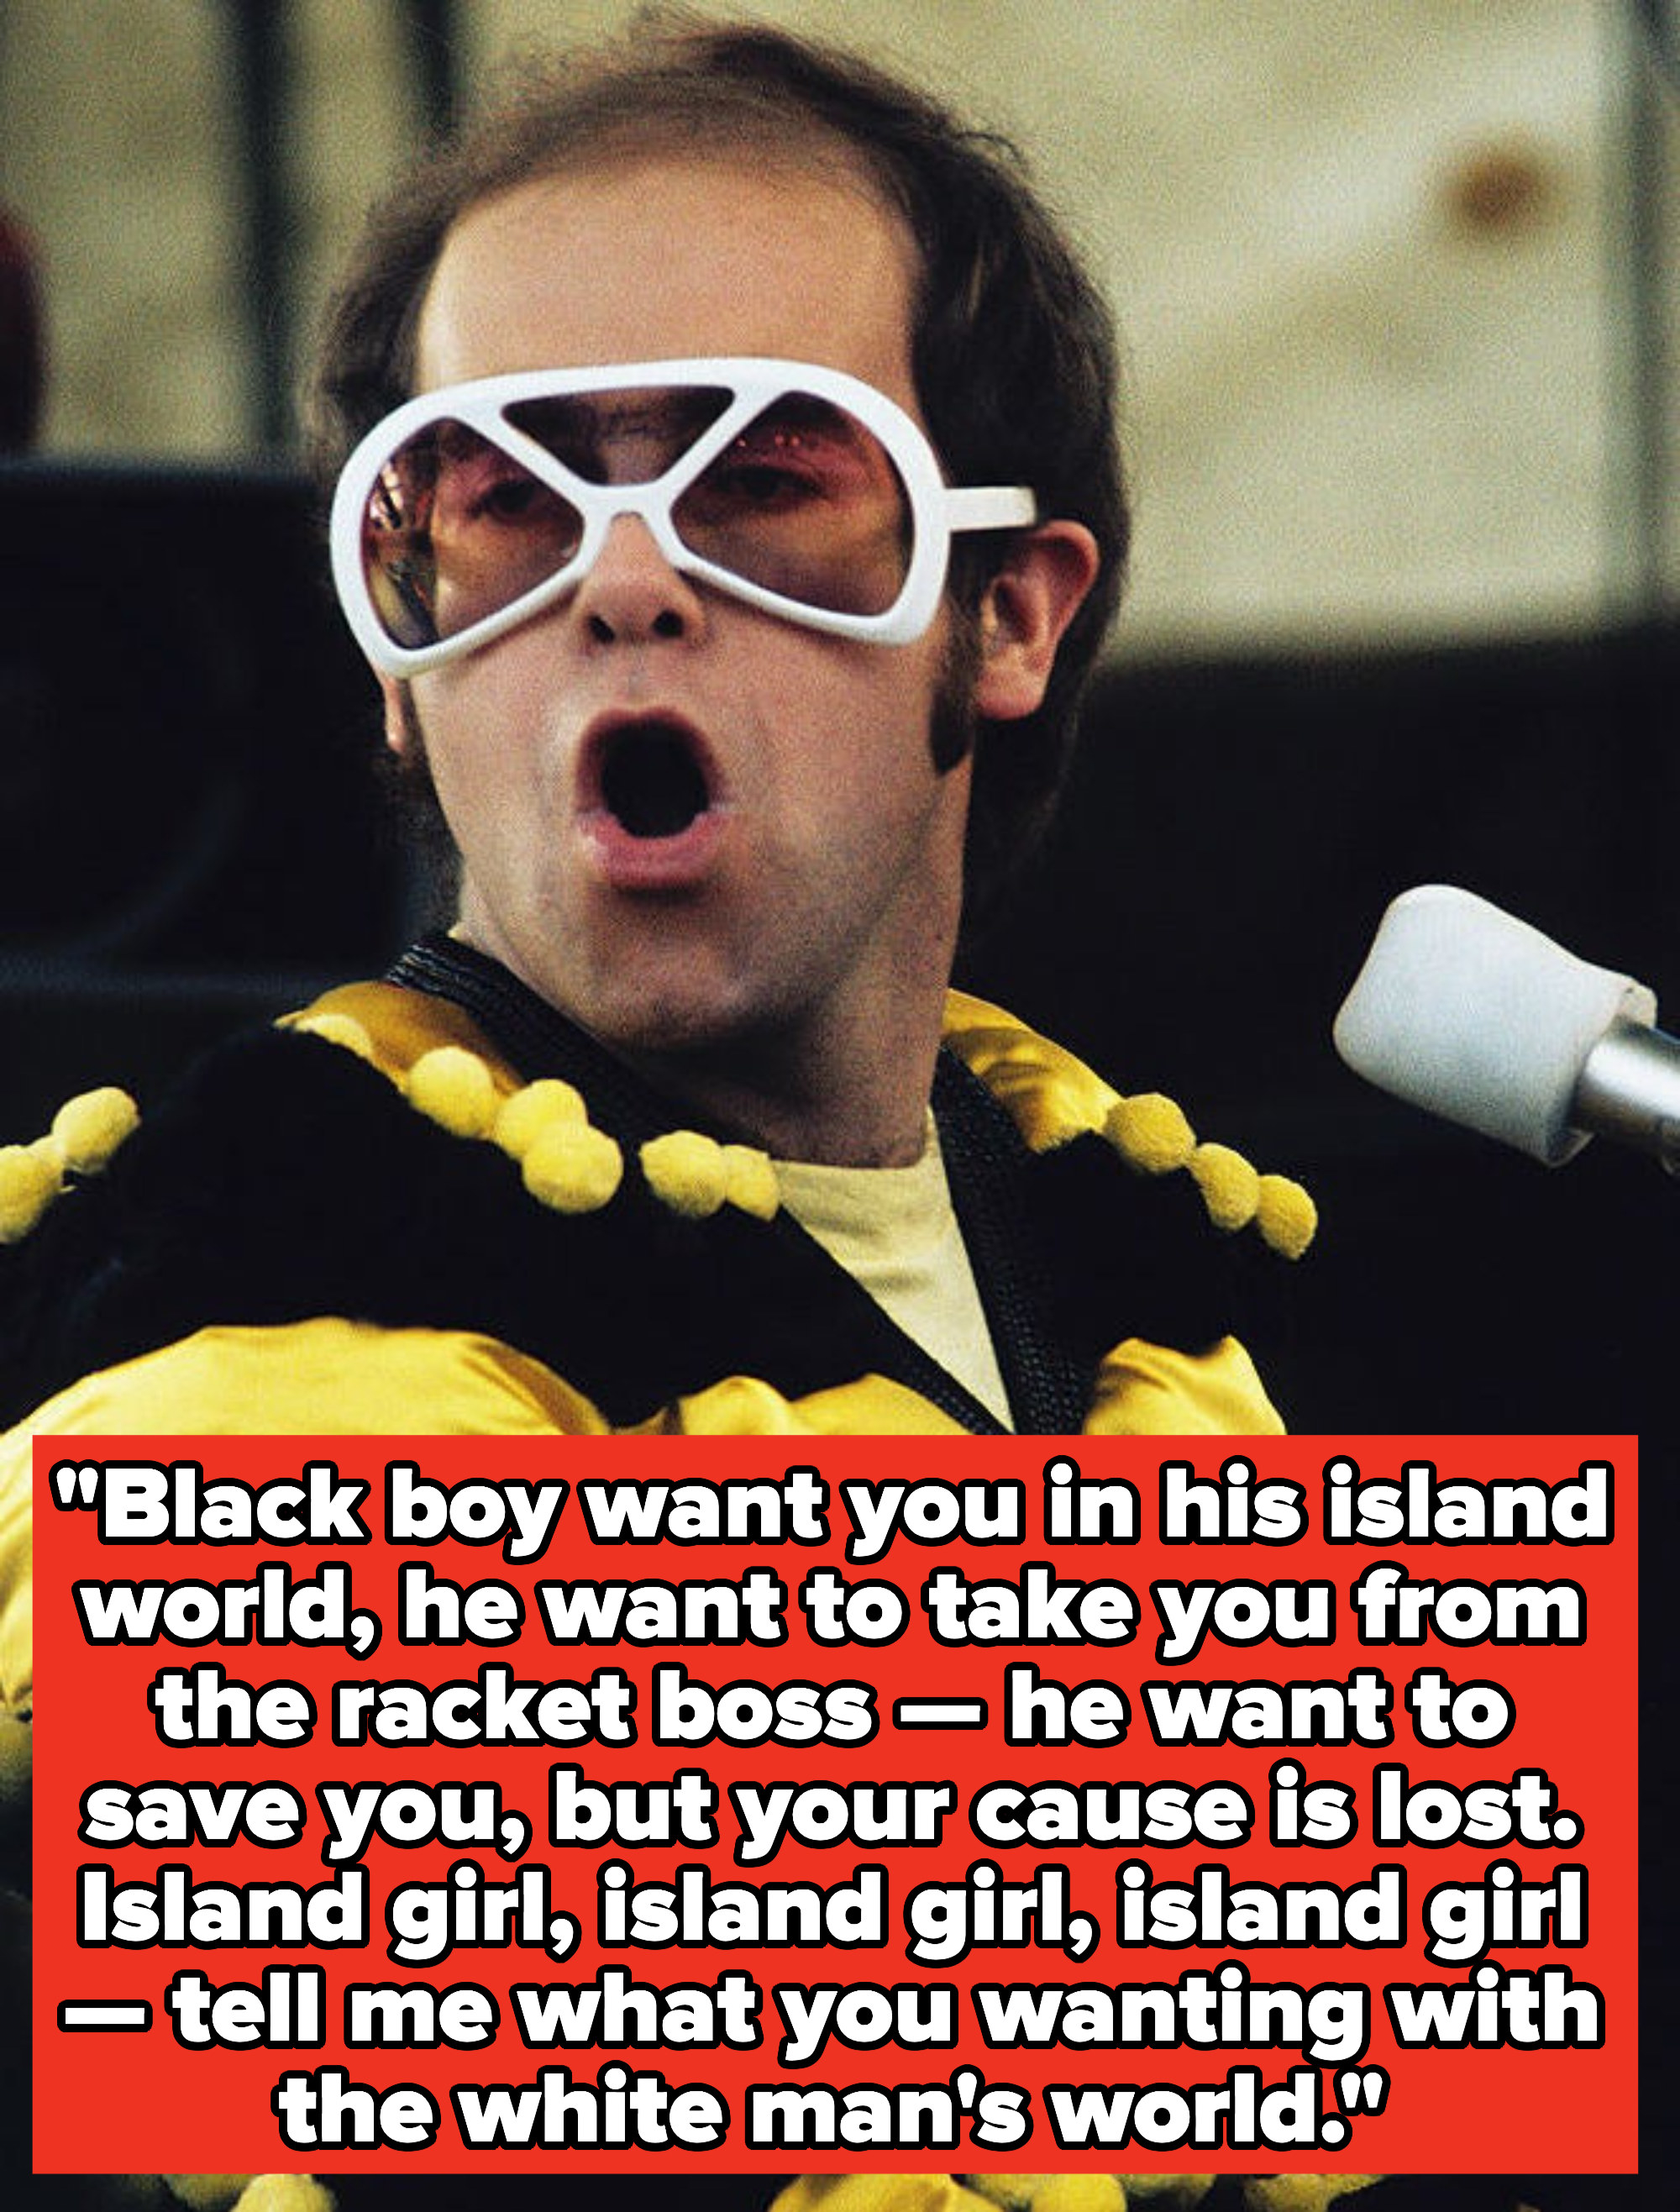 Elton John lyrics: &quot;Black boy want you in his island world, he want to take you from the racket boss -- he want to save you, but your cause is lost&quot;